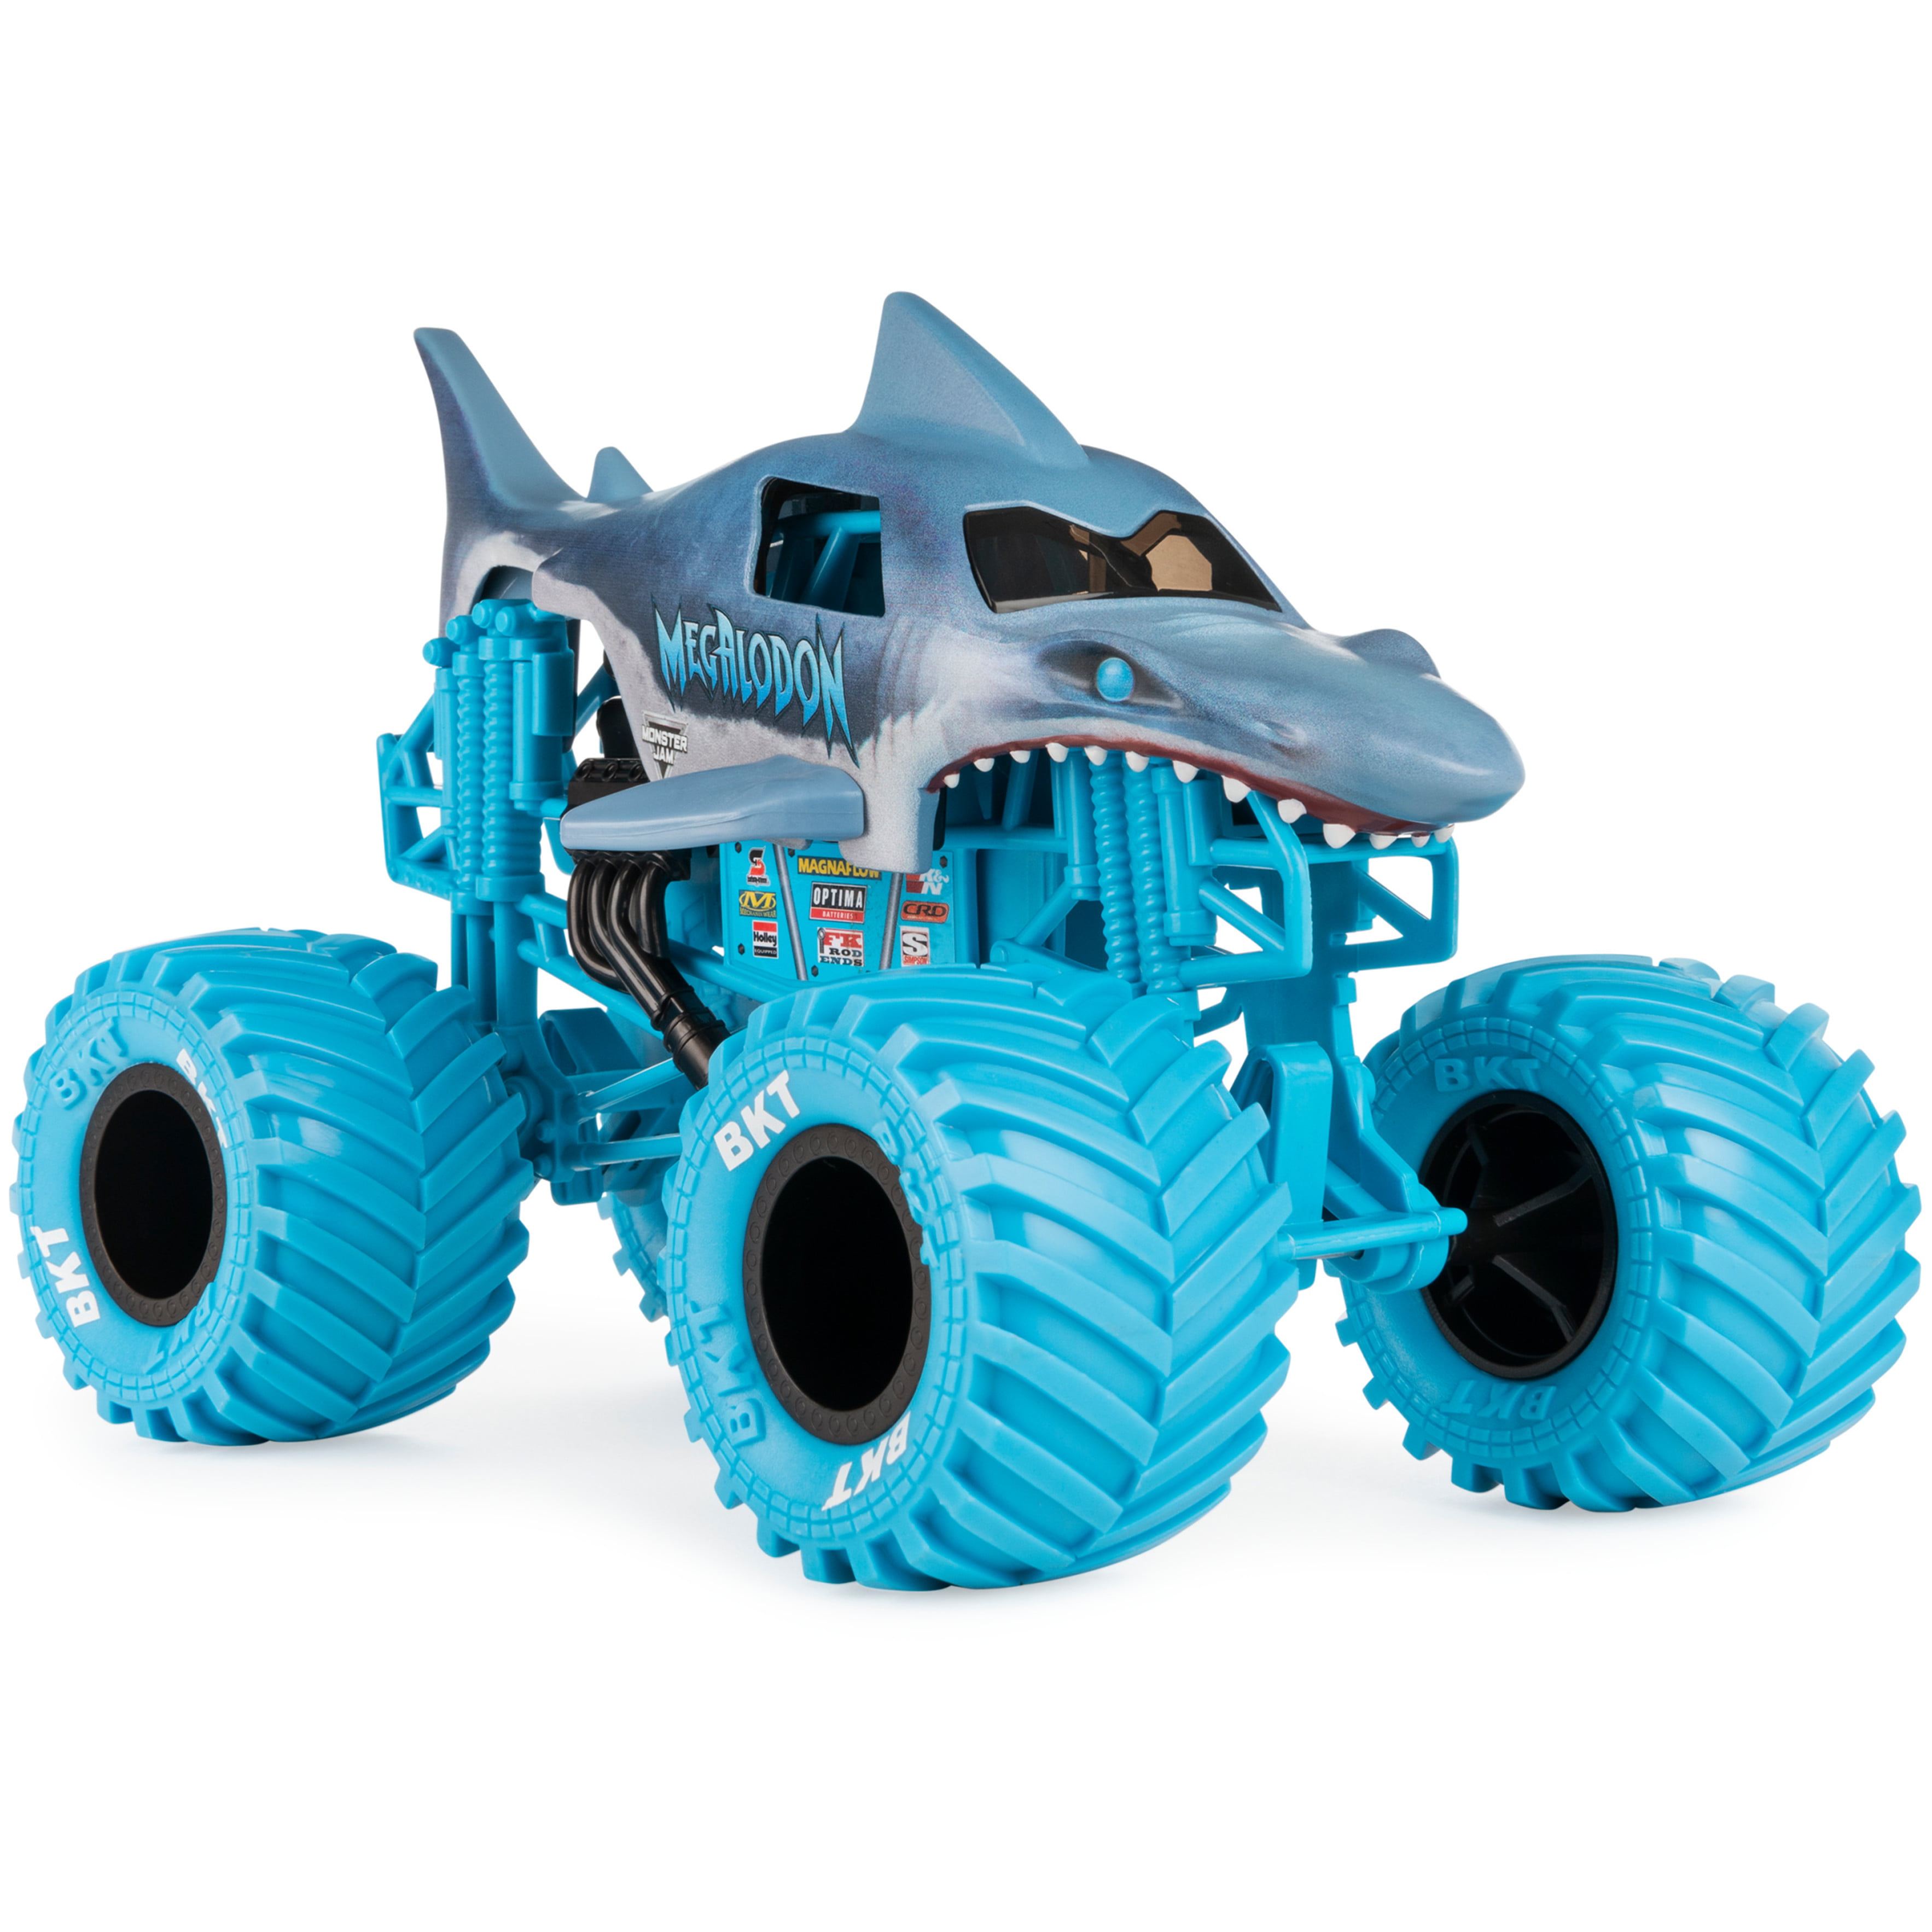 Monster Jam, Official Megalodon Remote Control Monster Truck for Boys and  Girls, 1:24 Scale, 2.4 GHz, Kids Toys for Ages 4-6+